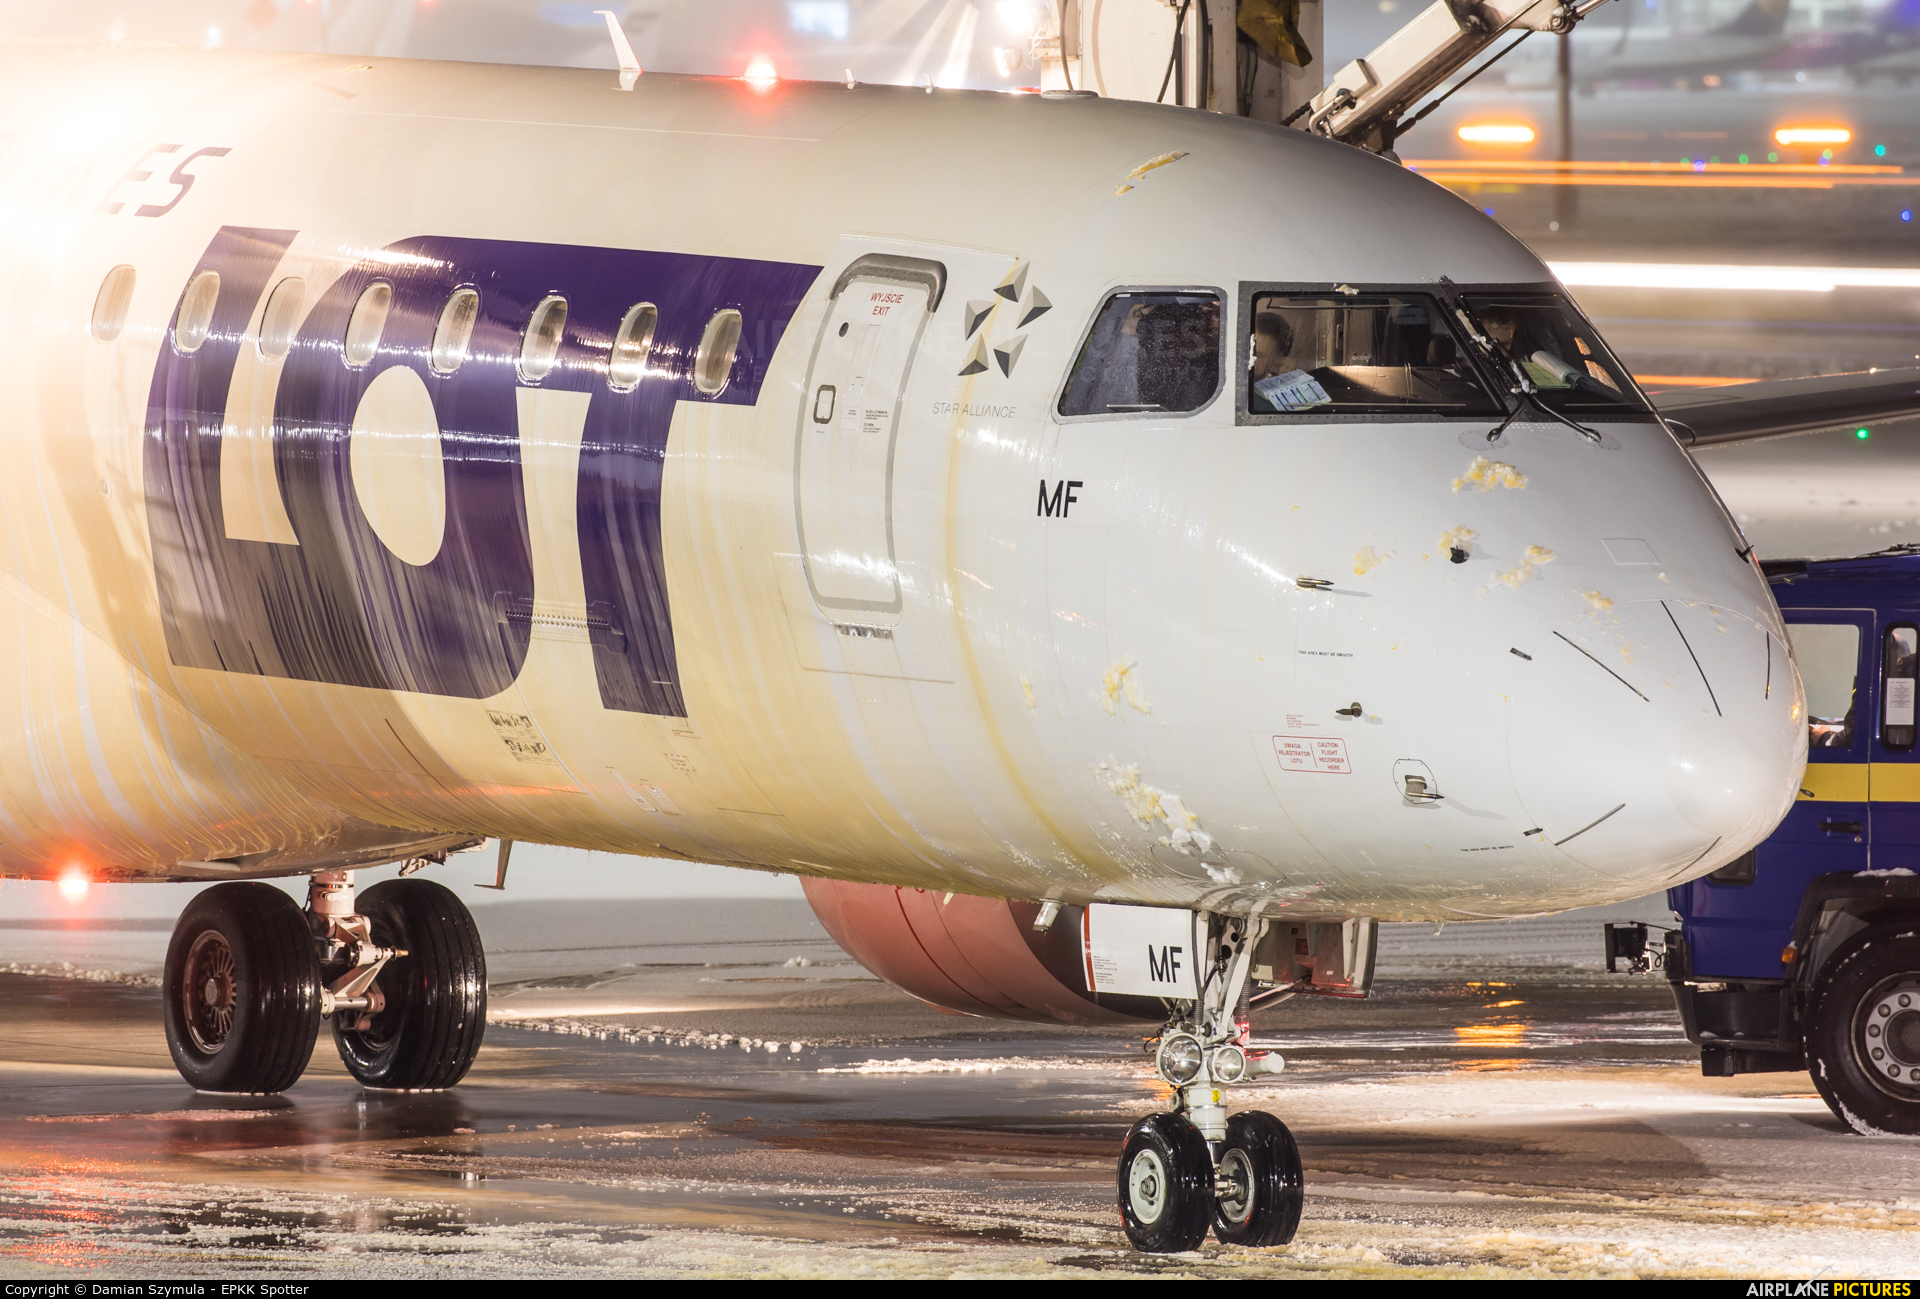 LOT - Polish Airlines SP-LMF aircraft at Katowice - Pyrzowice